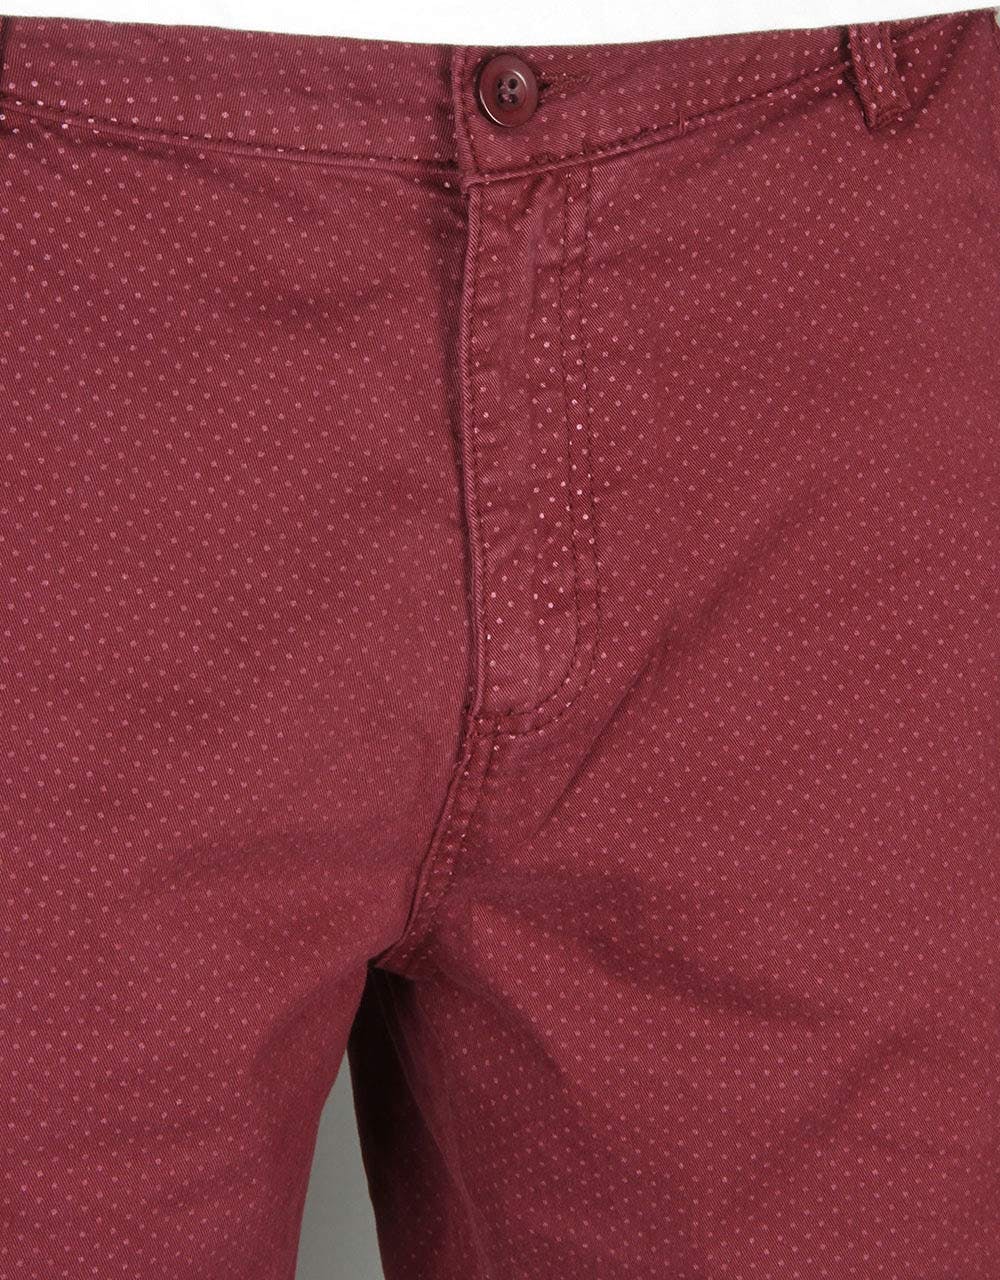 Route One Roll Up Printed Chino Shorts - Burgundy